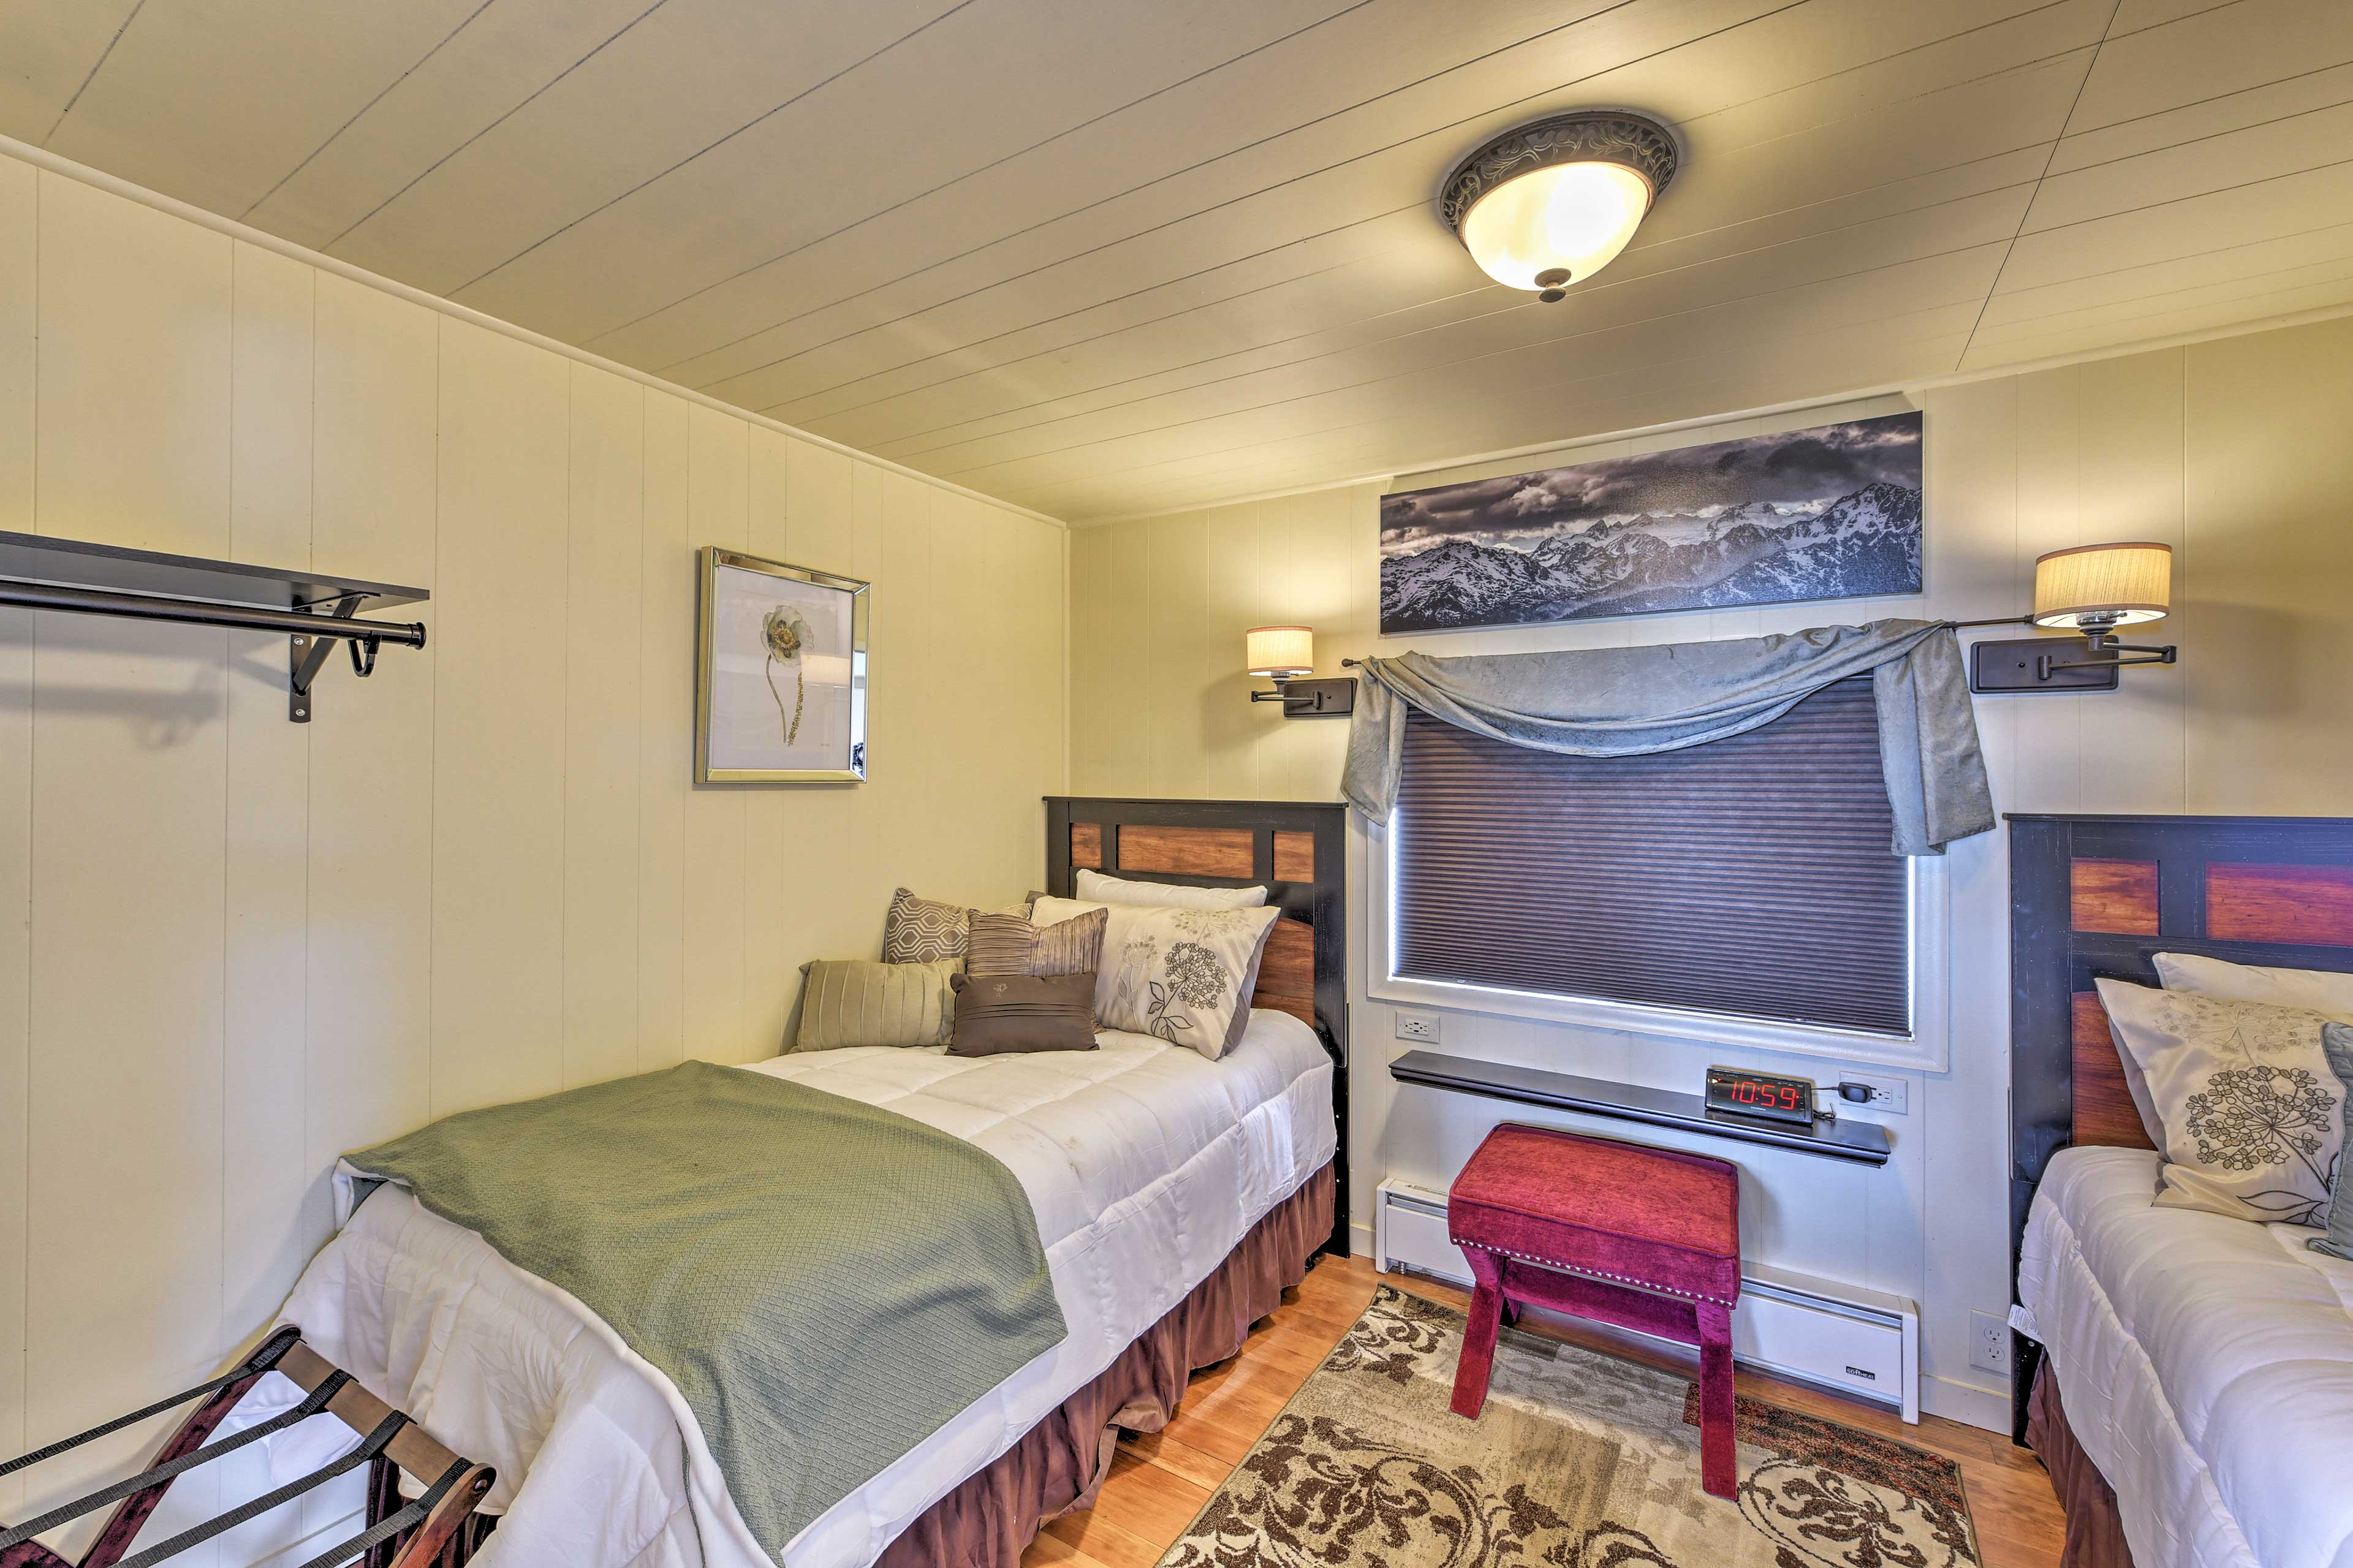 The 3rd bedroom hosts a set of twin beds.